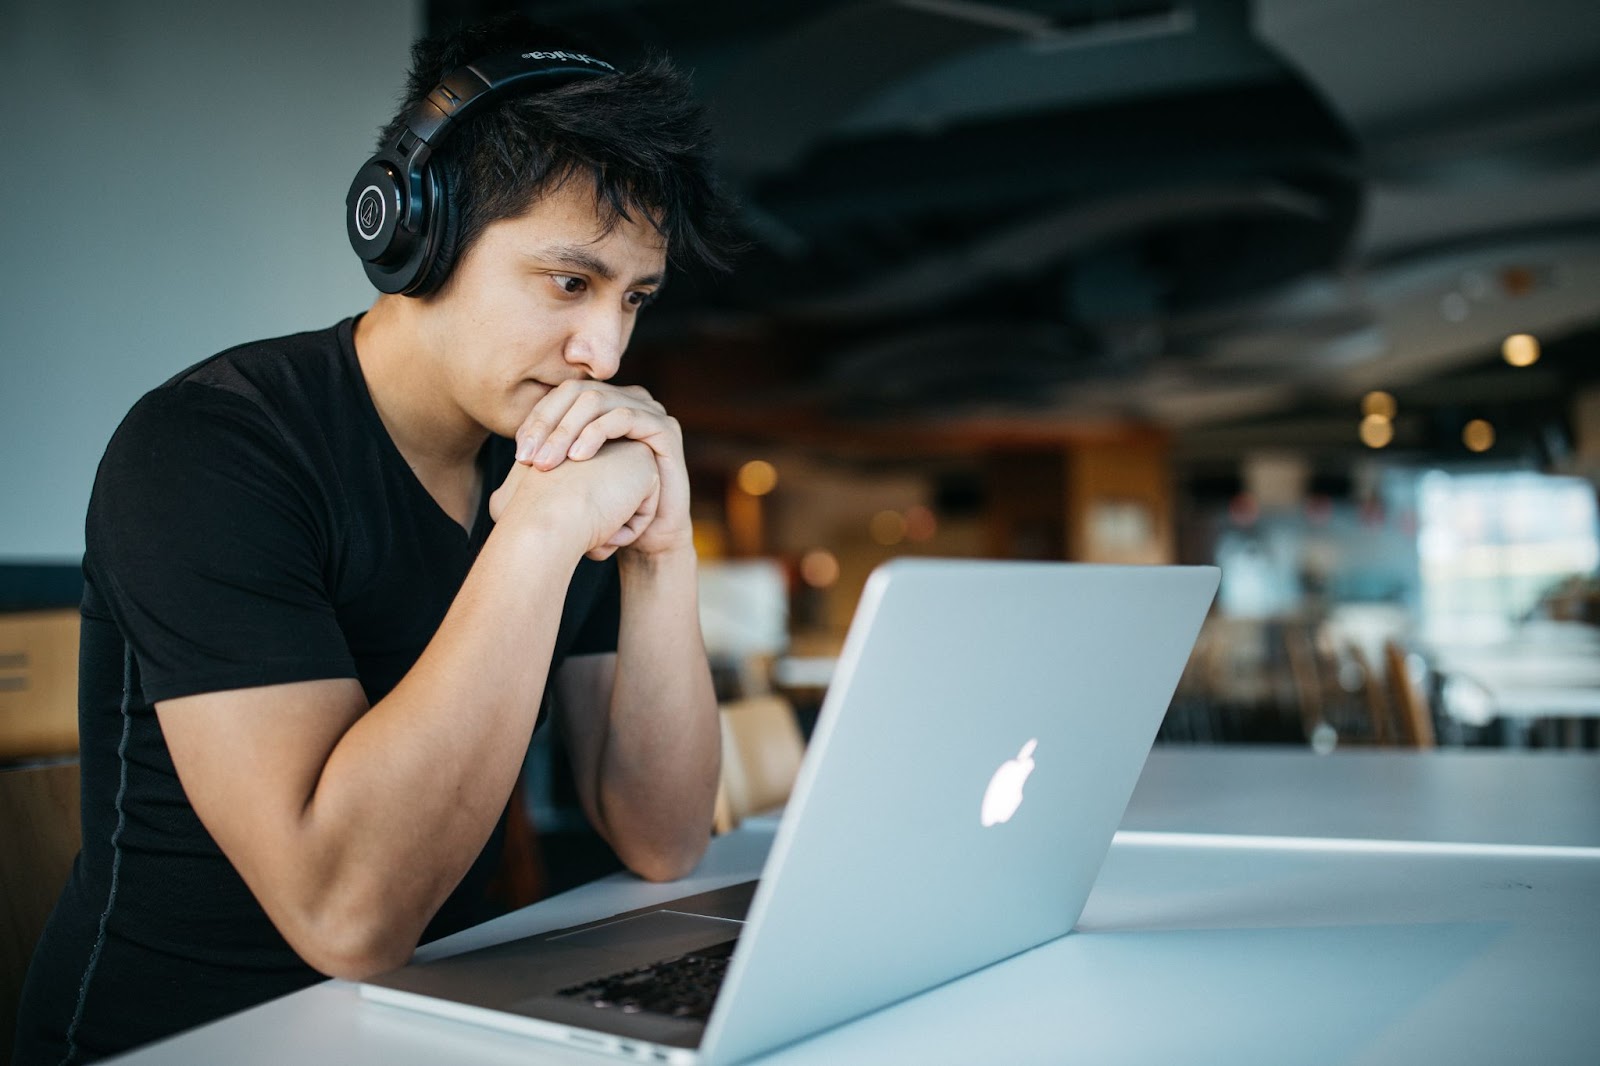 A picture of a young man, wearing headphones, staring pensively at his Mac laptop.